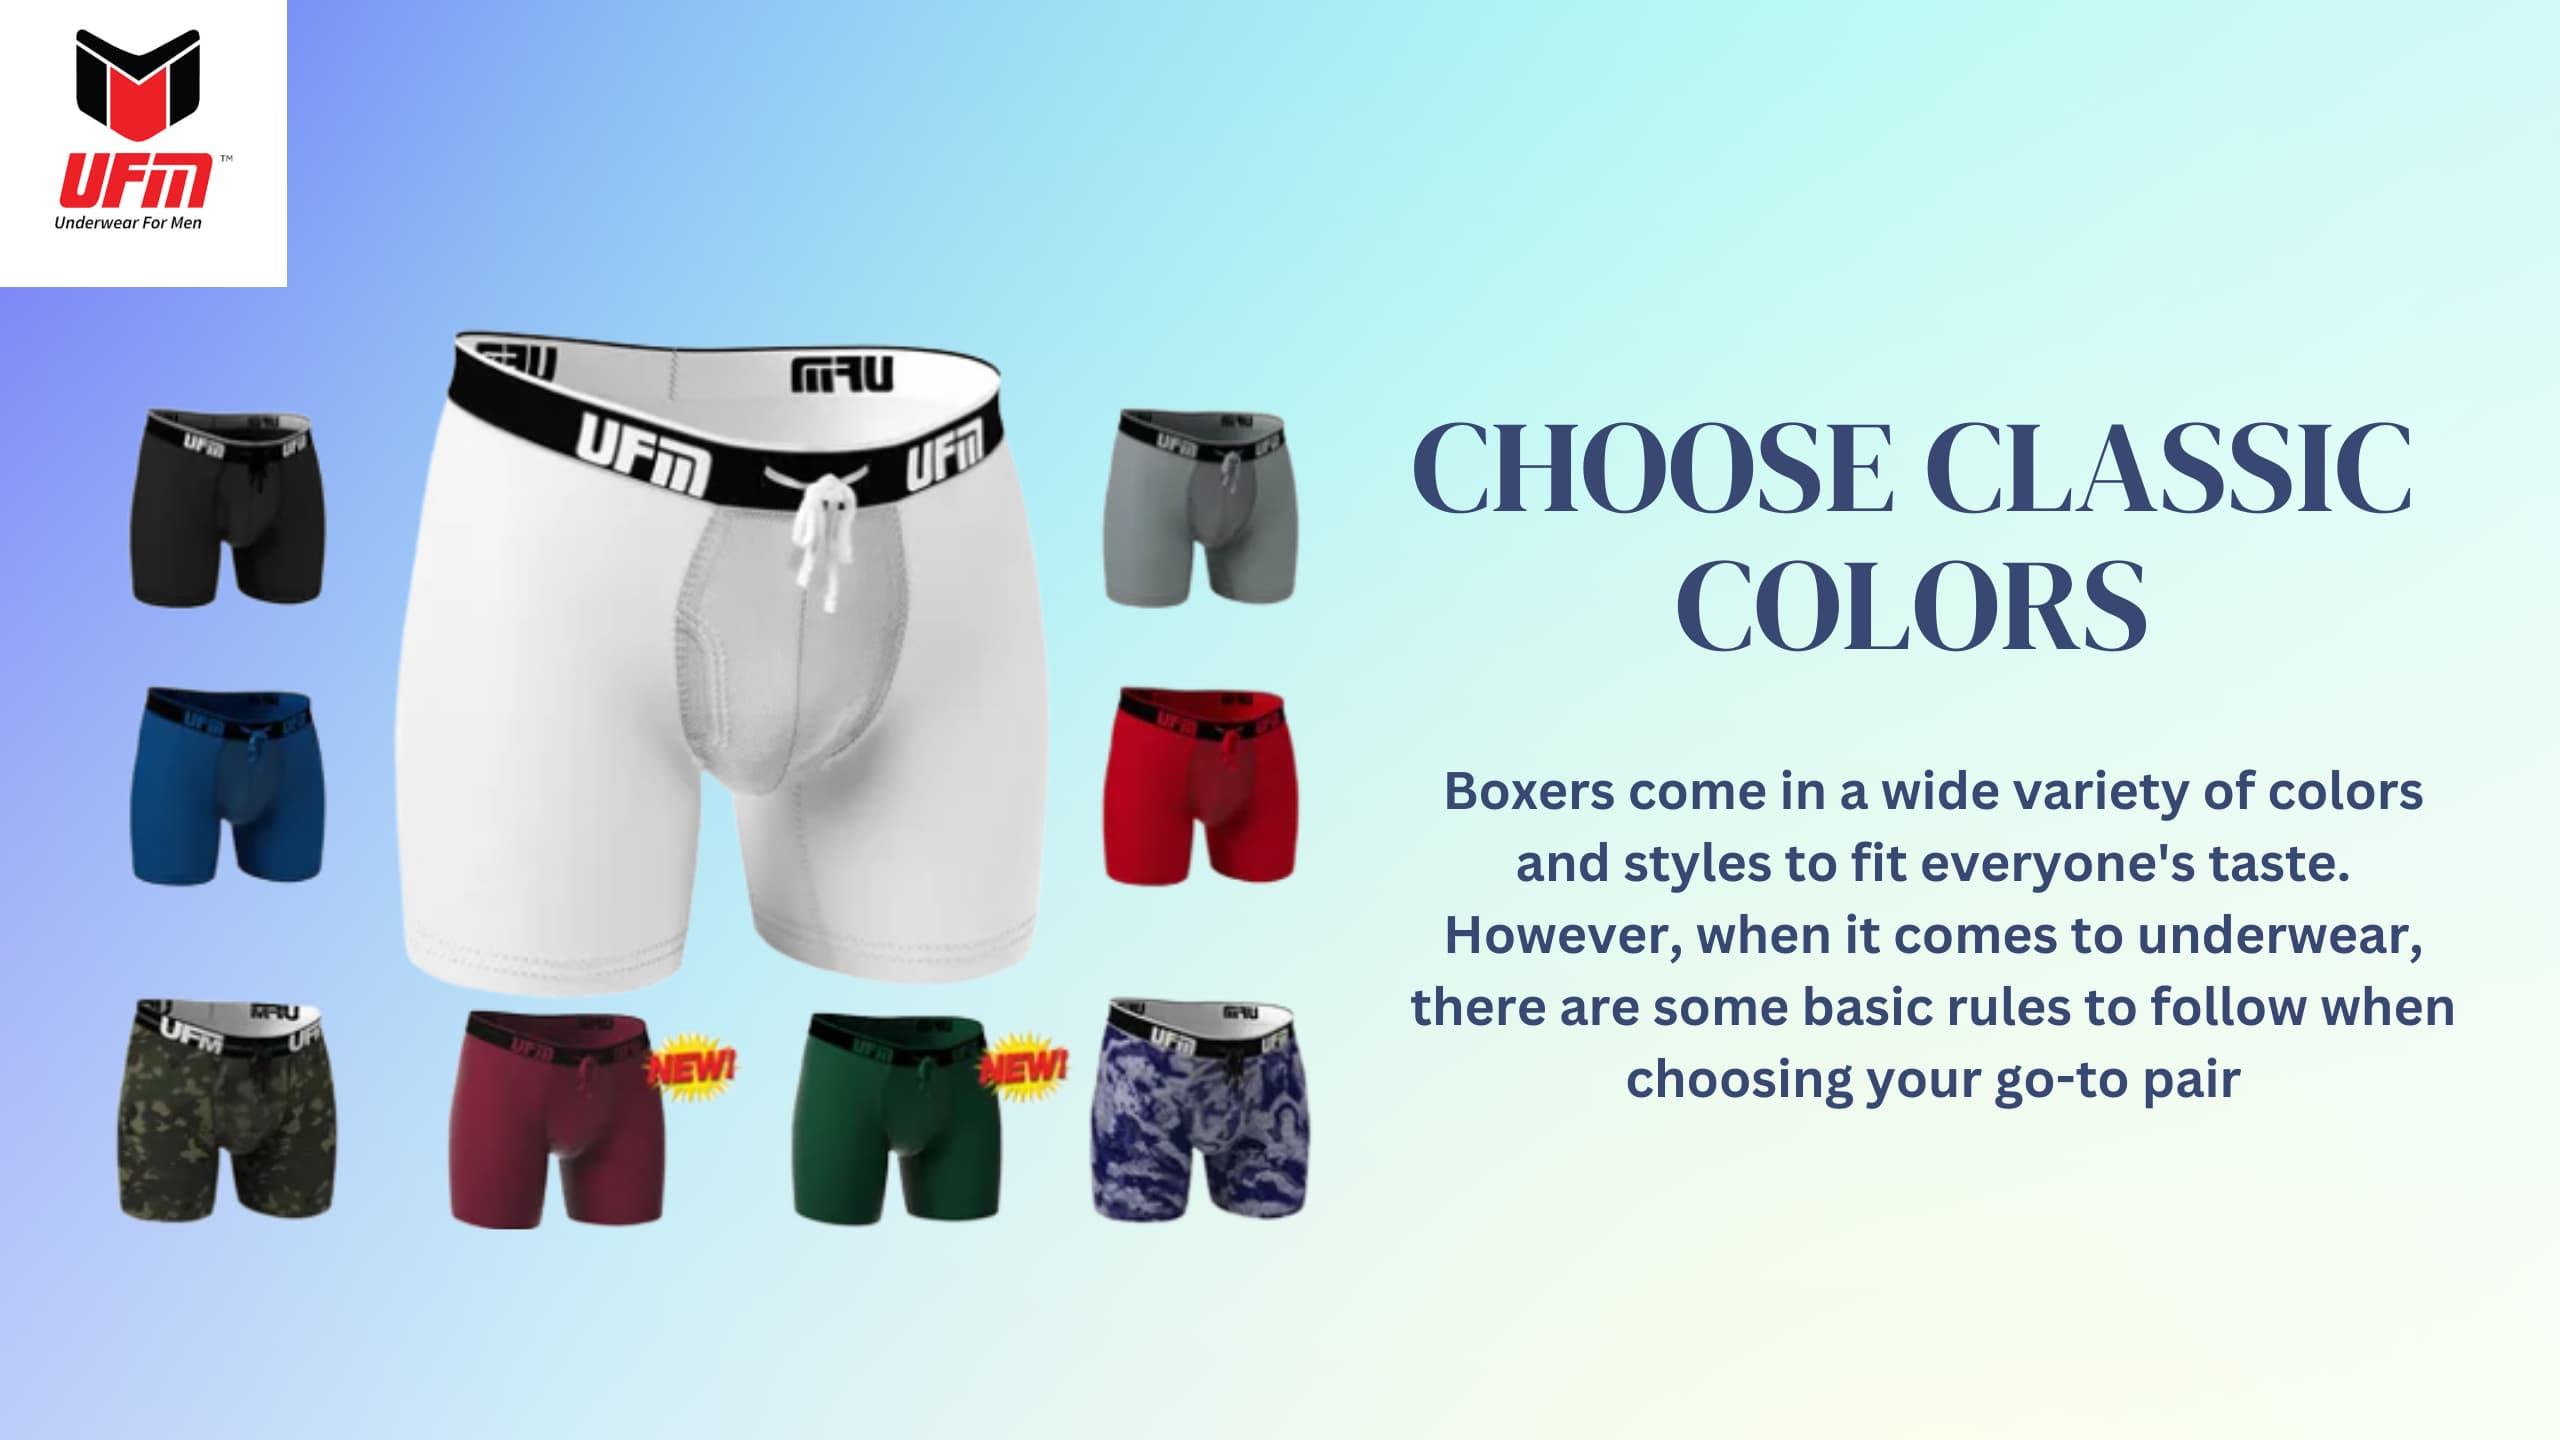 Selecting Underwear with Flying Colors